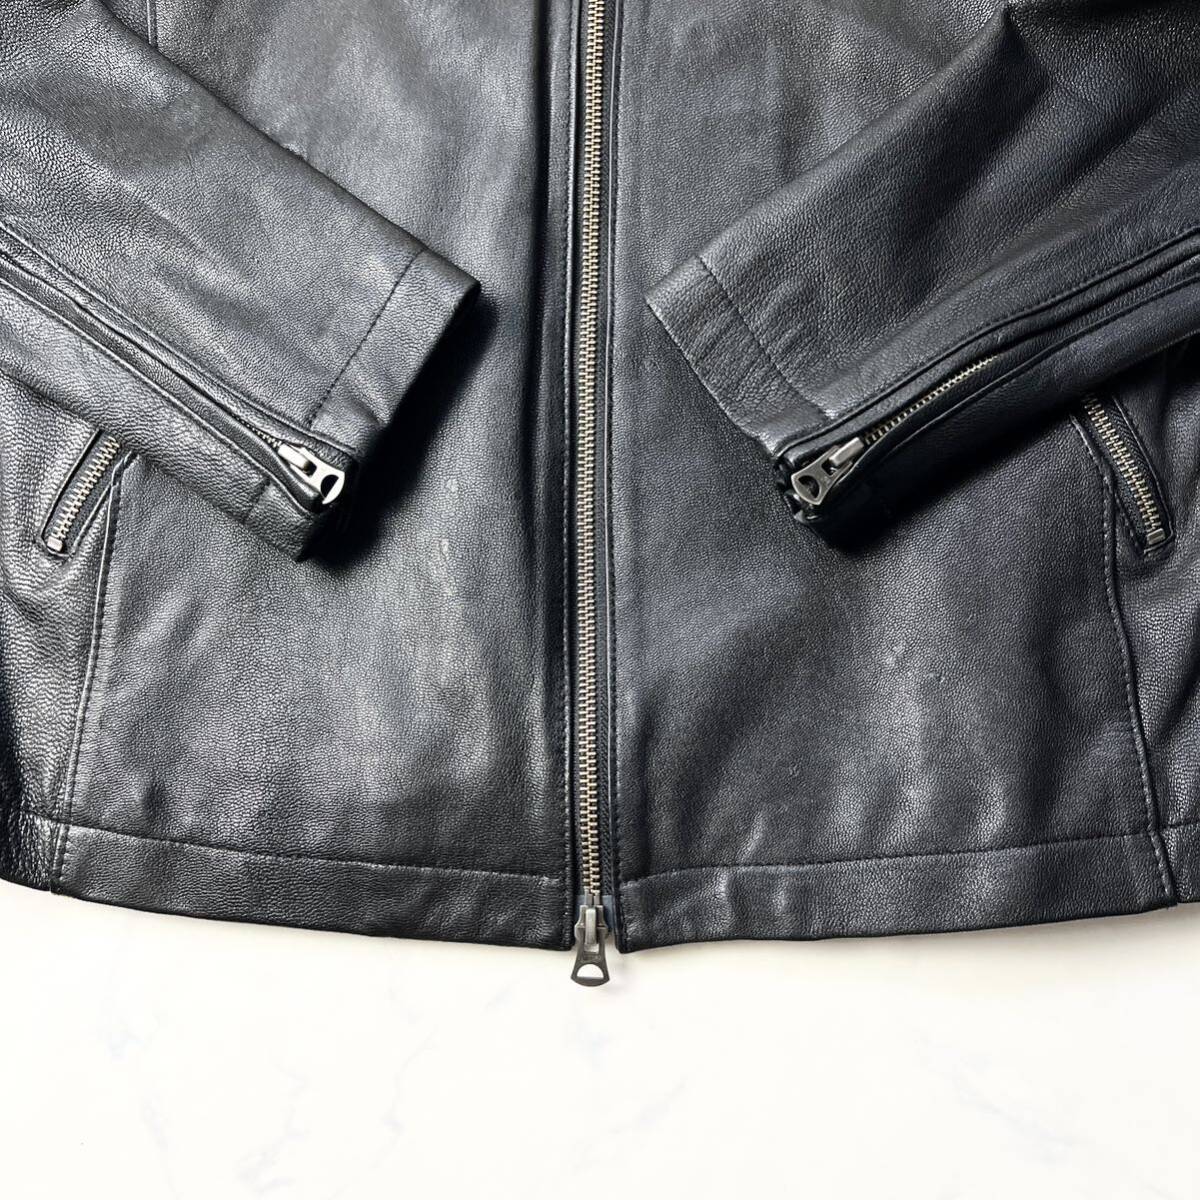 E4( rare size L) United Arrows A DAY IN THE LIFEgo-to leather rider's jacket single mountain sheep leather black L UNITED ARROWS